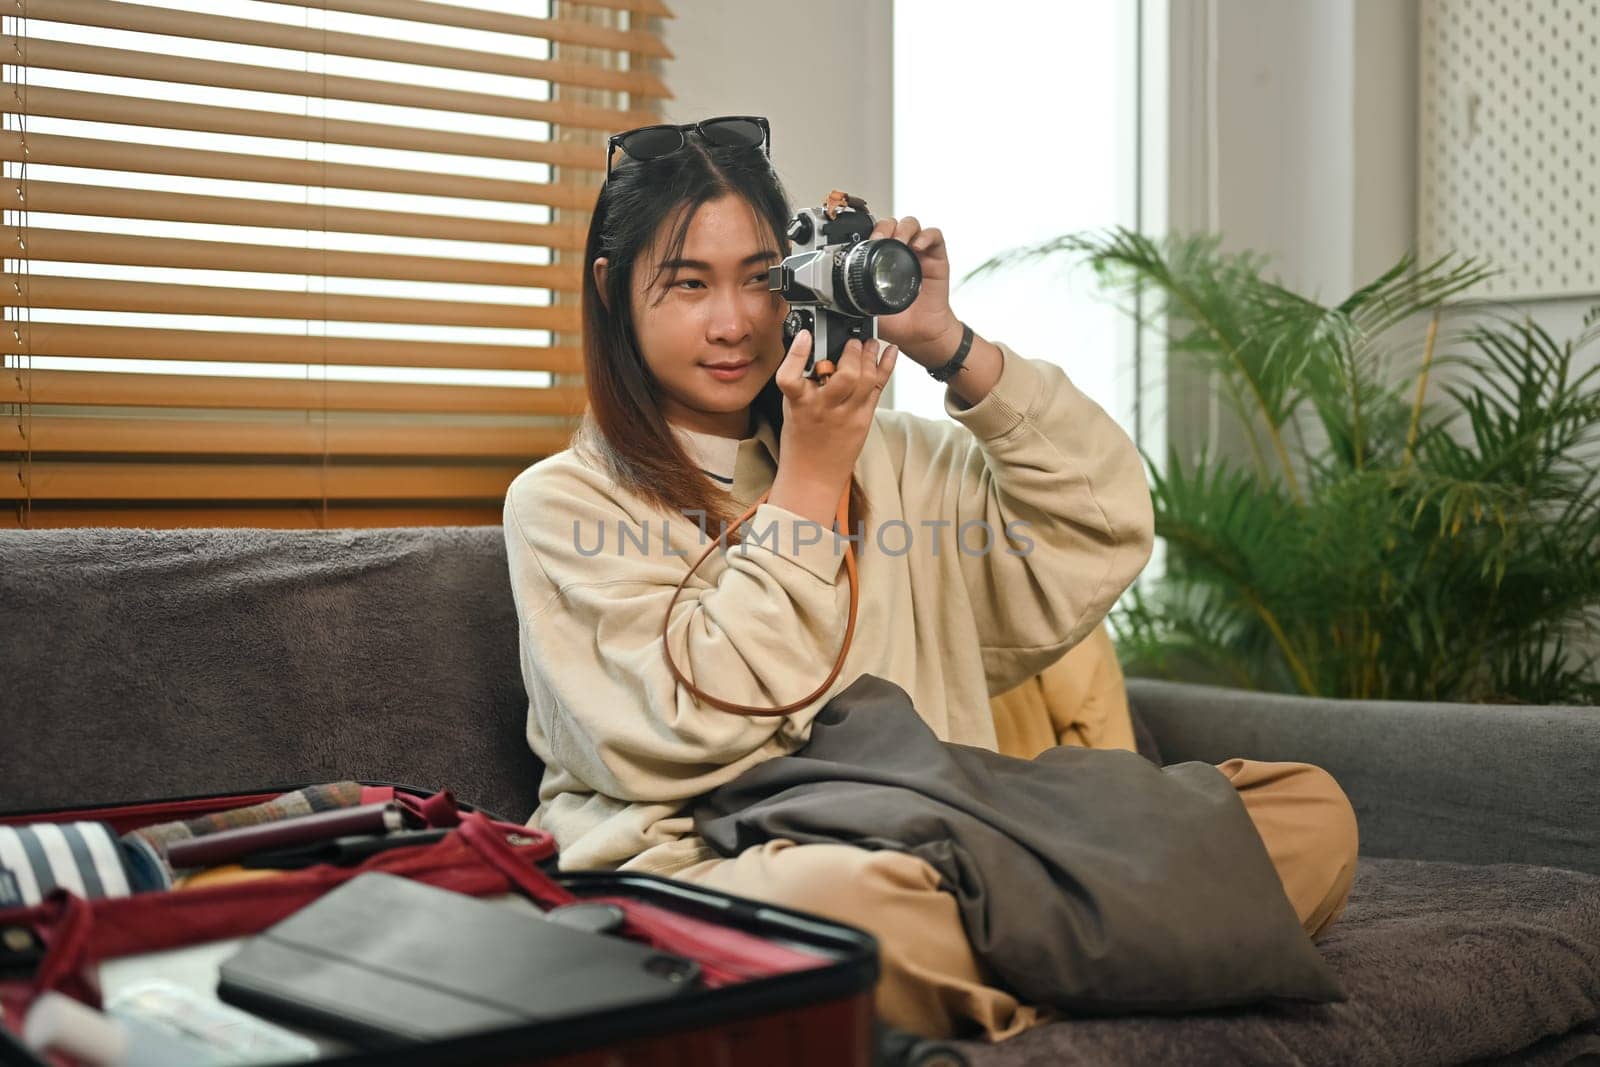 Young woman with clothes in suitcase sitting on couch, preparing for vacations trip.